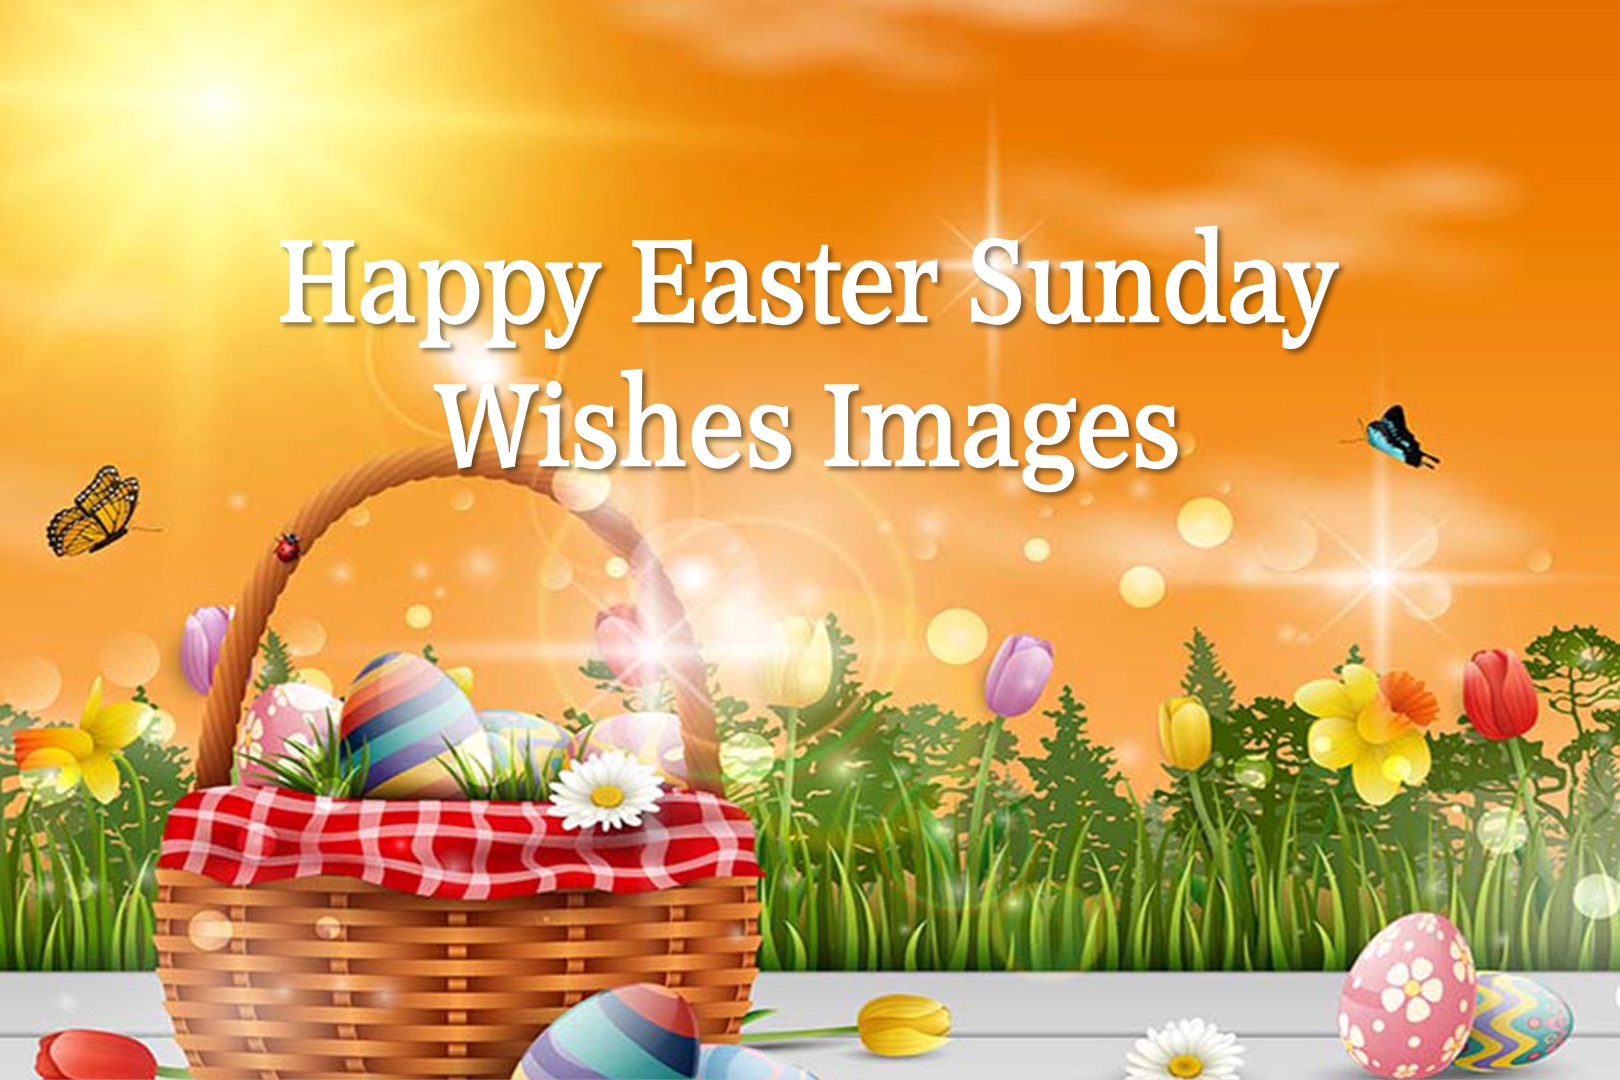 Happy Easter Sunday Wishes Images | Happy Easter Pics | SuperbWishes